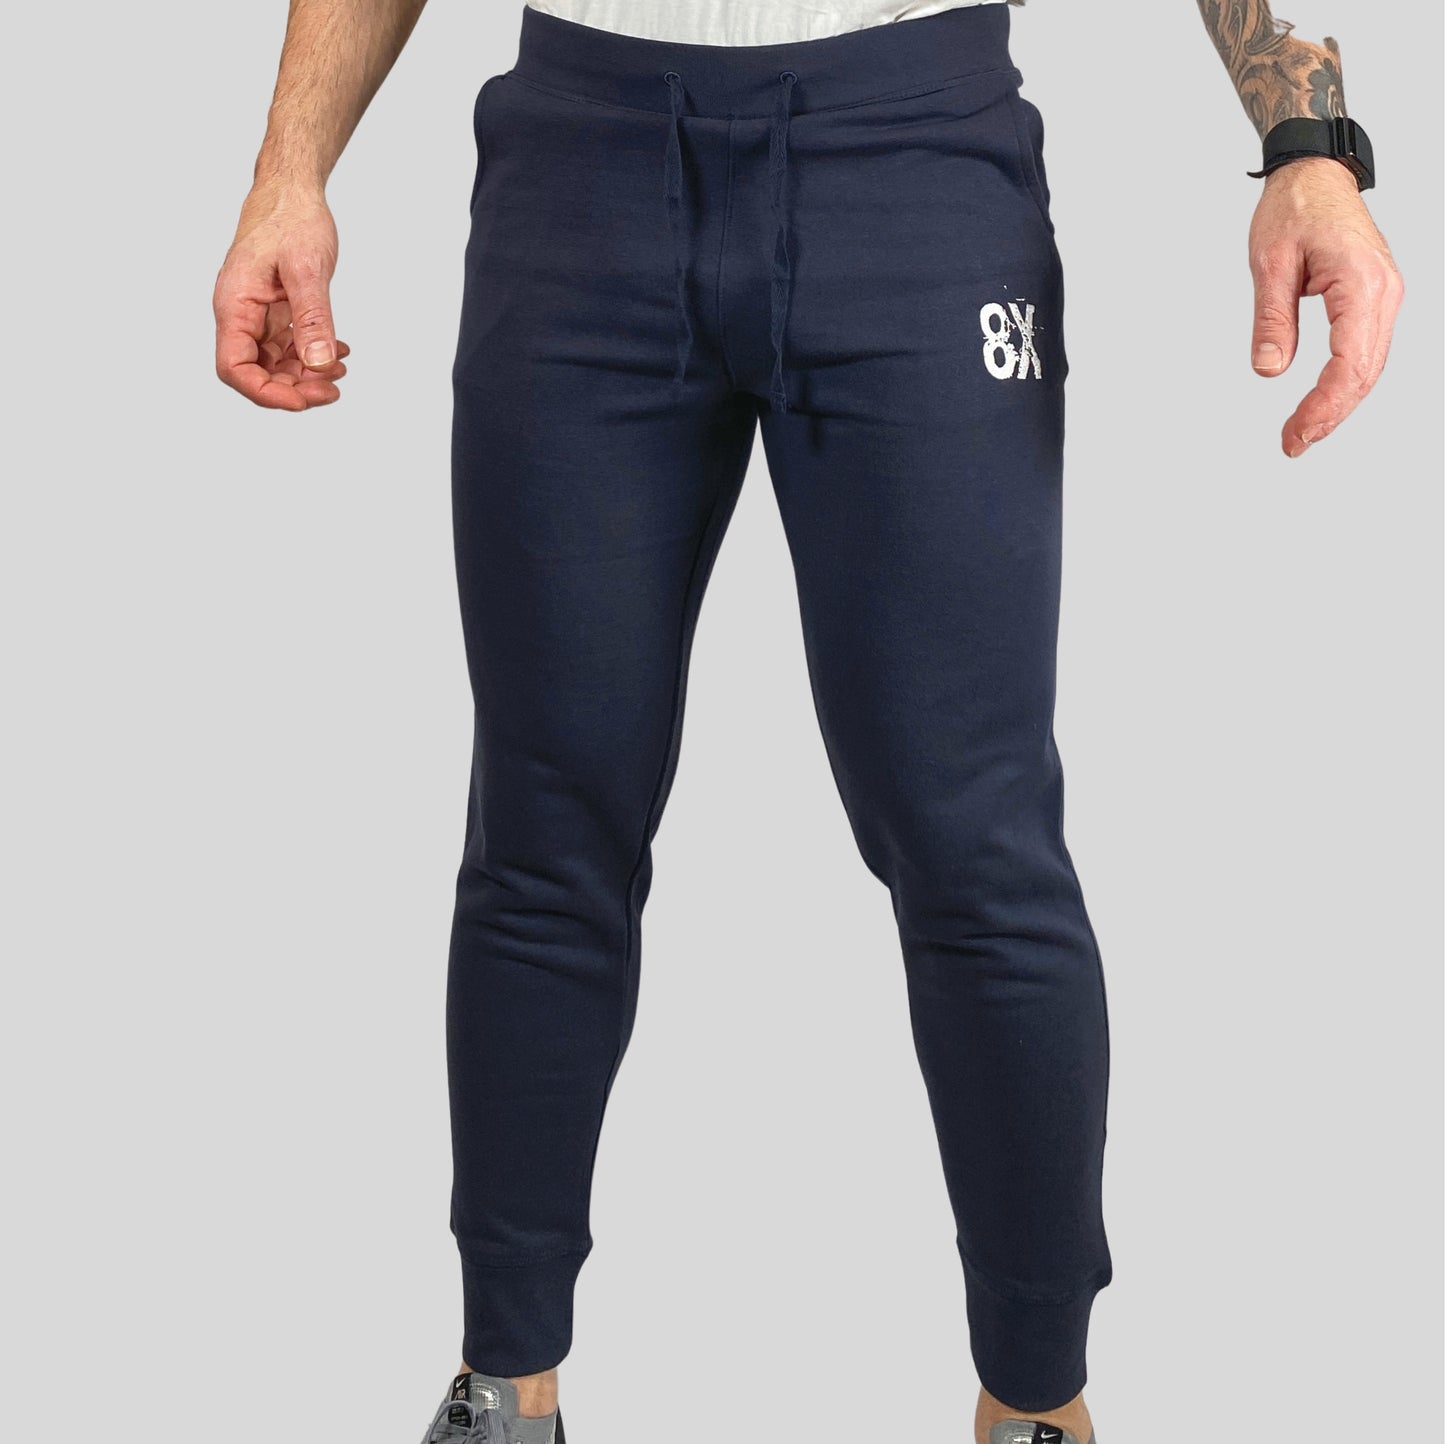 EVERYDAY | Unisex Embroidered 8X Slim Cuffed Joggers | Navy